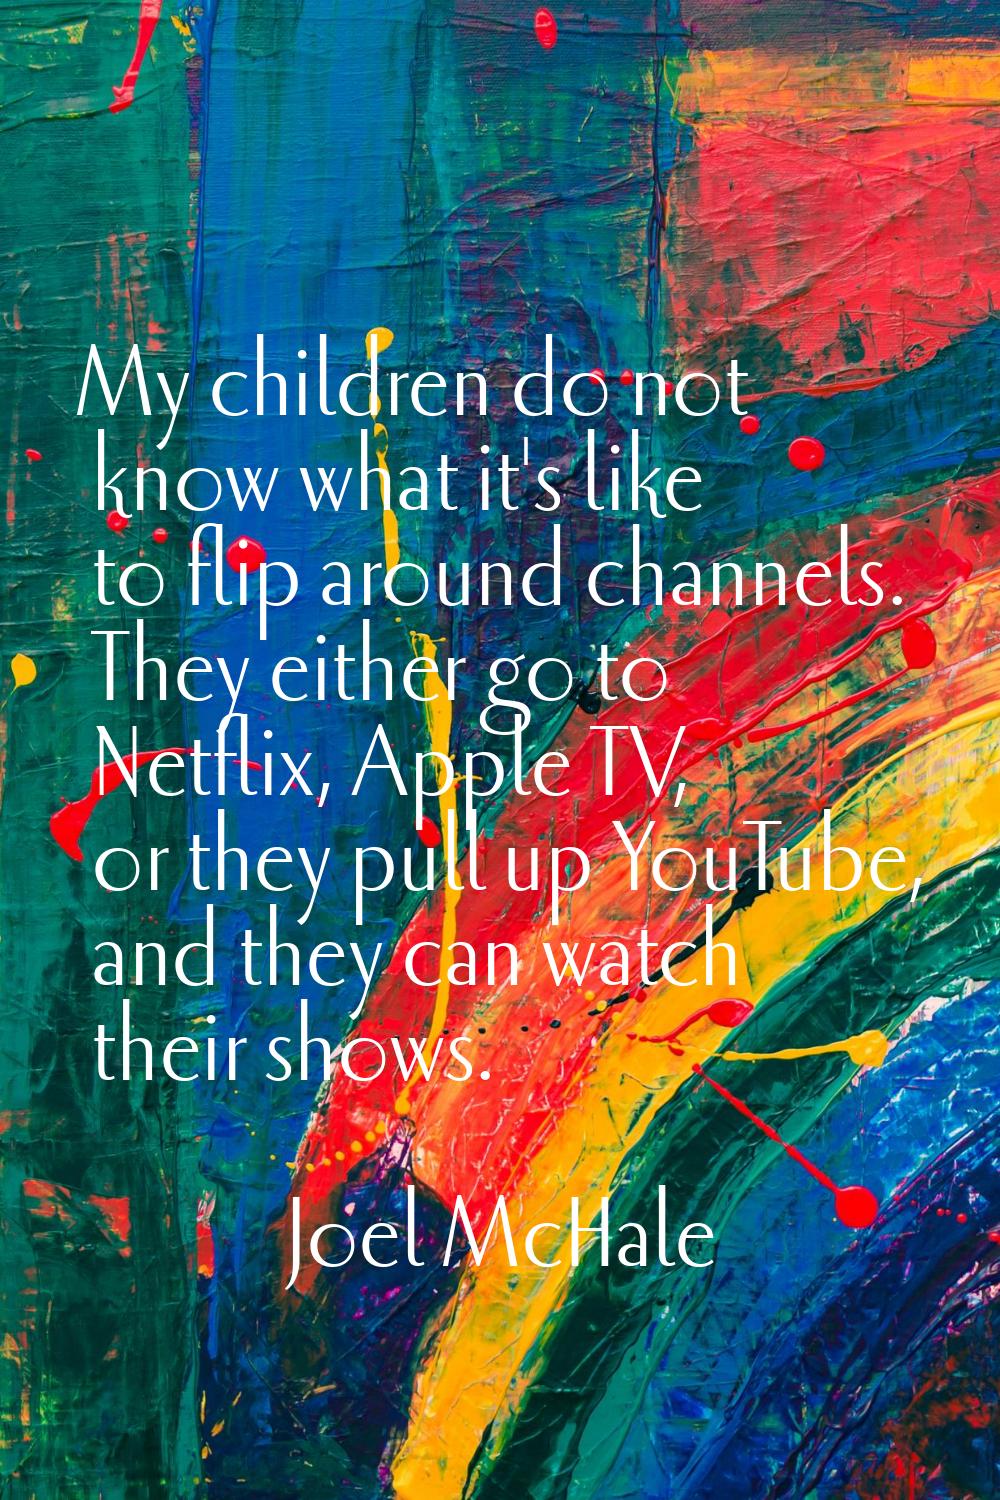 My children do not know what it's like to flip around channels. They either go to Netflix, Apple TV